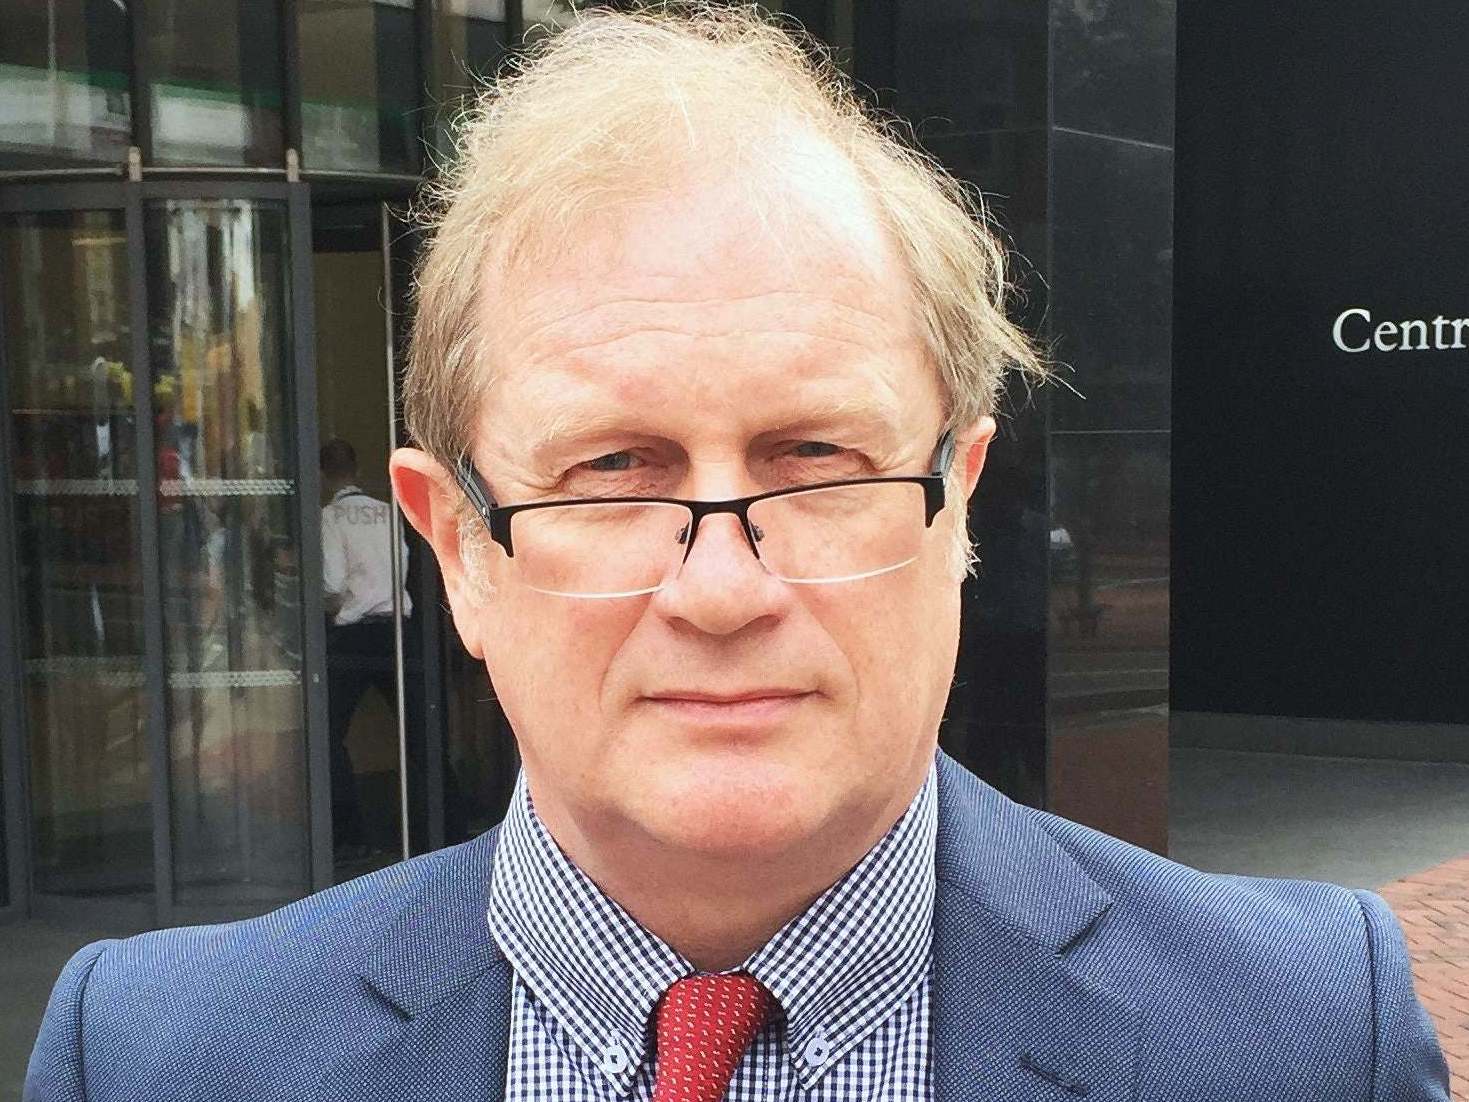 Dr David Mackereth, pictured outside the employment tribunal building in Birmingham.